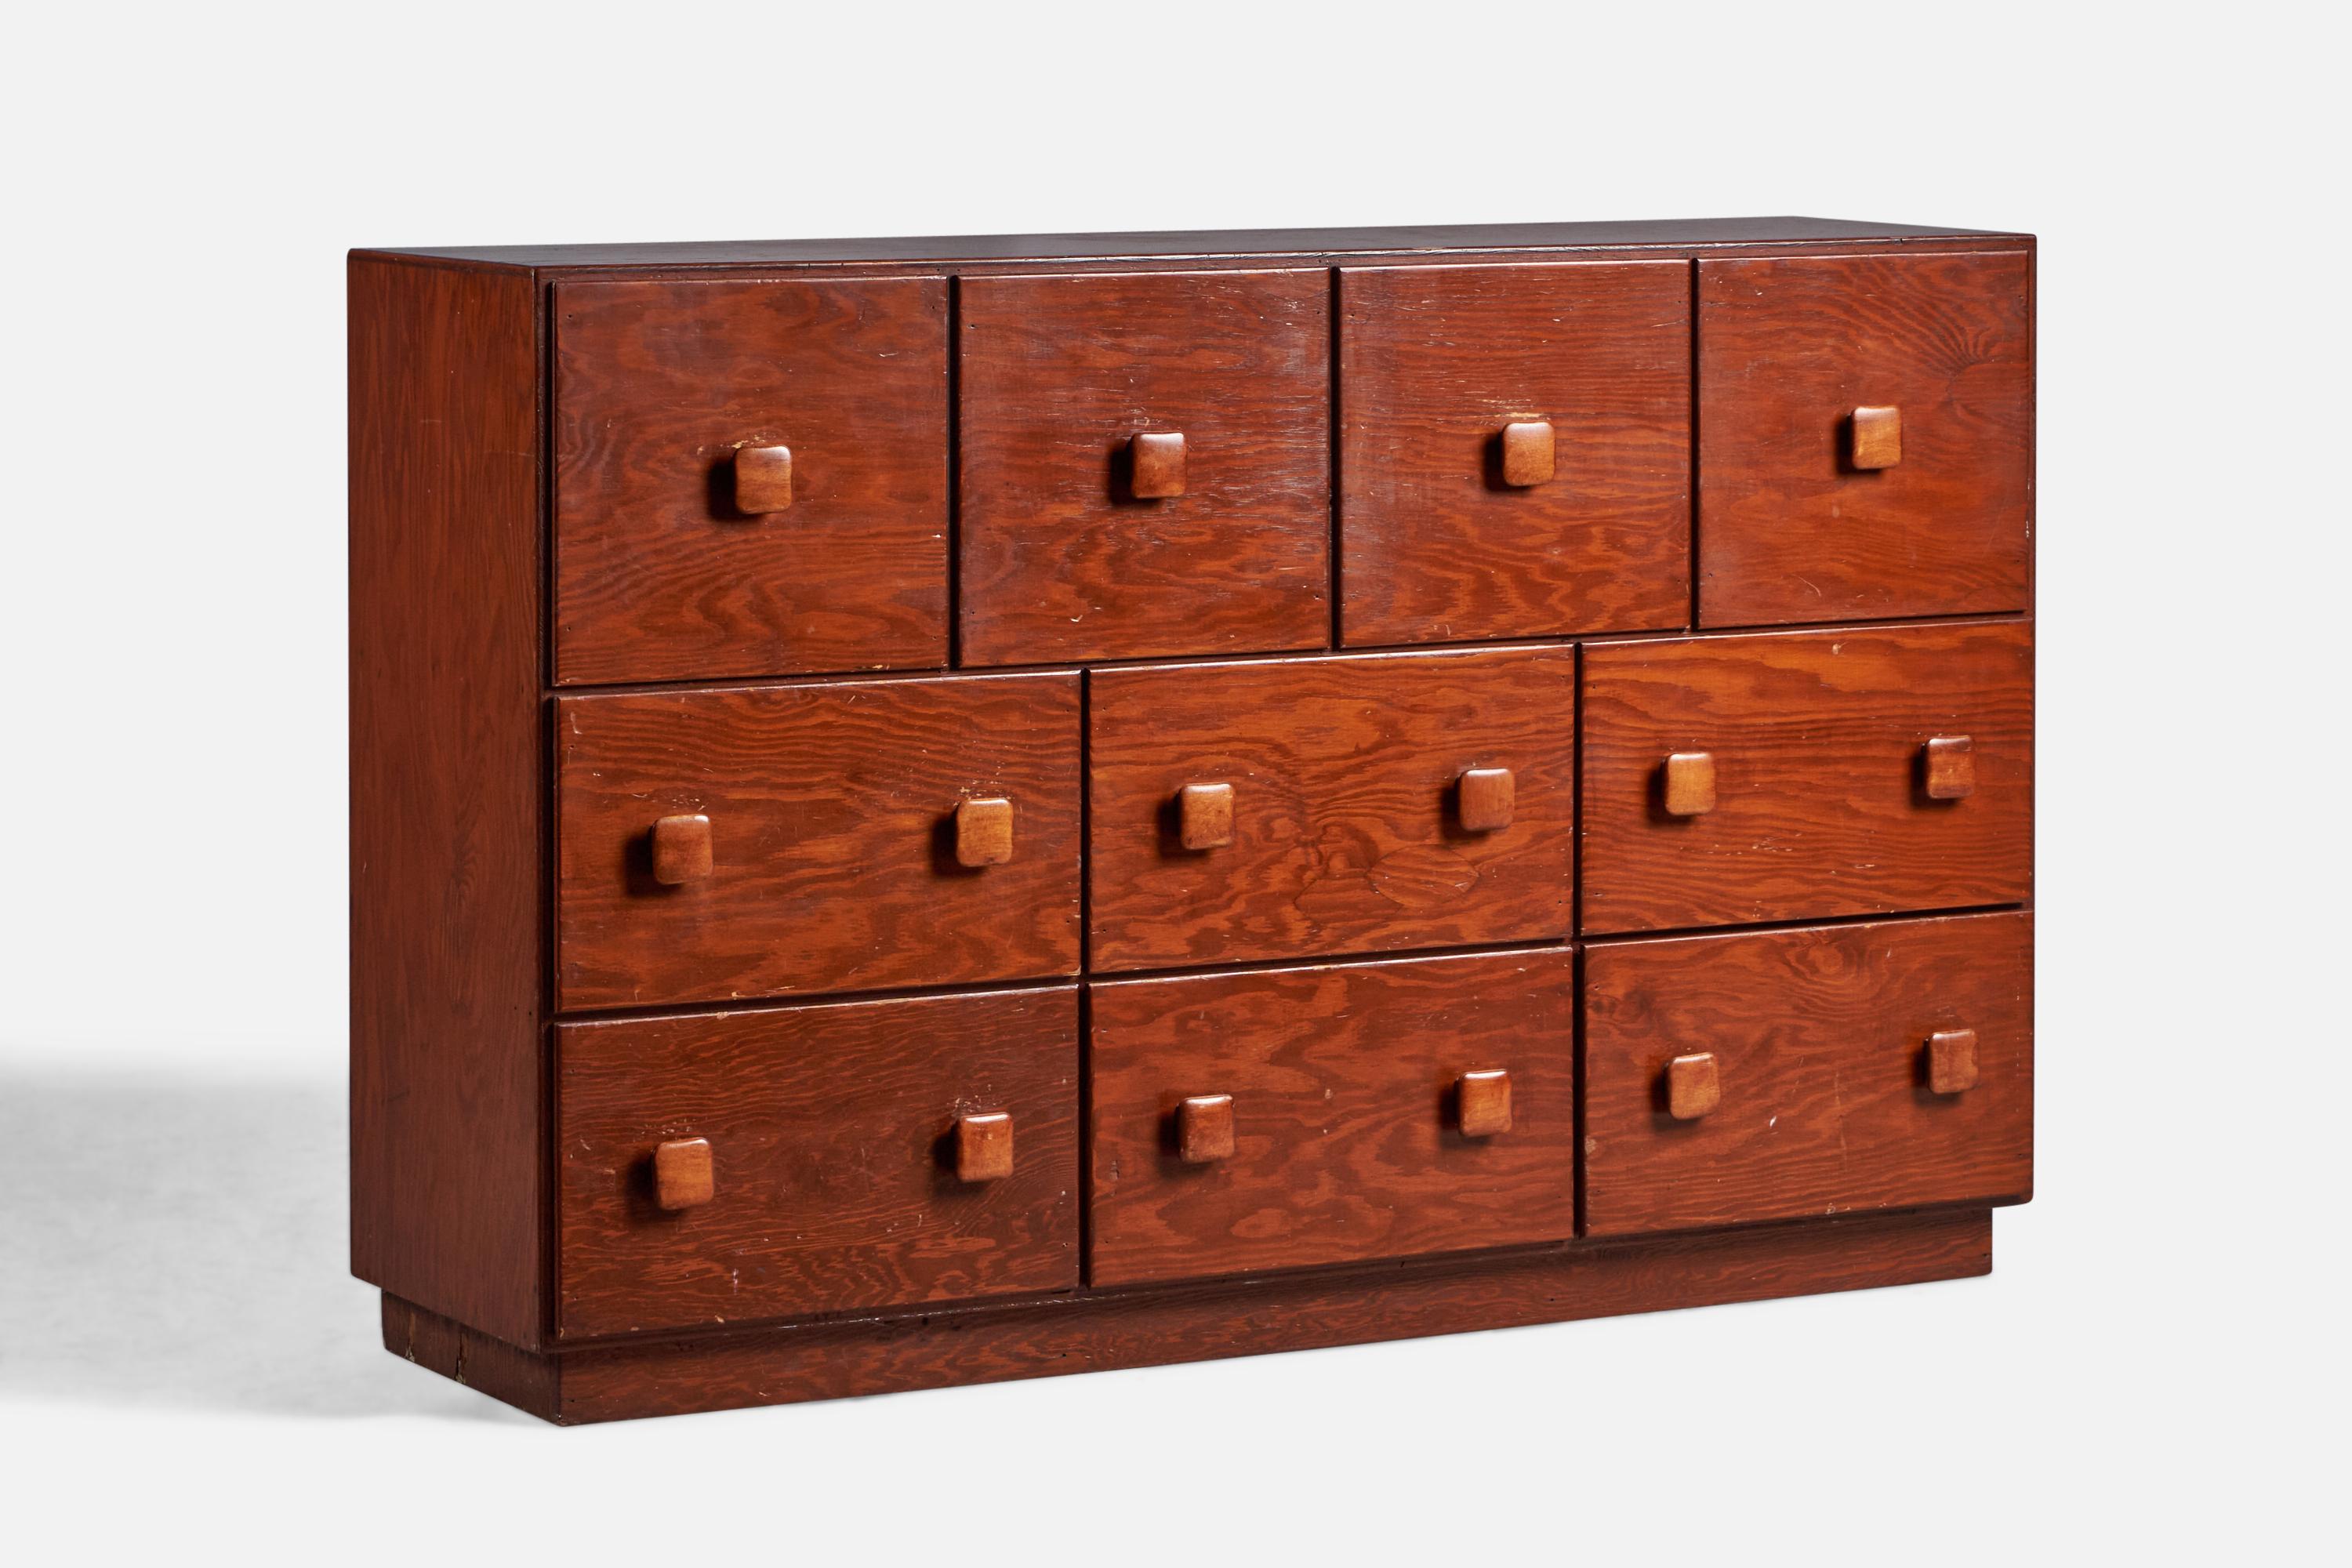 A stained oak dresser designed and produced in the US, 1940s.